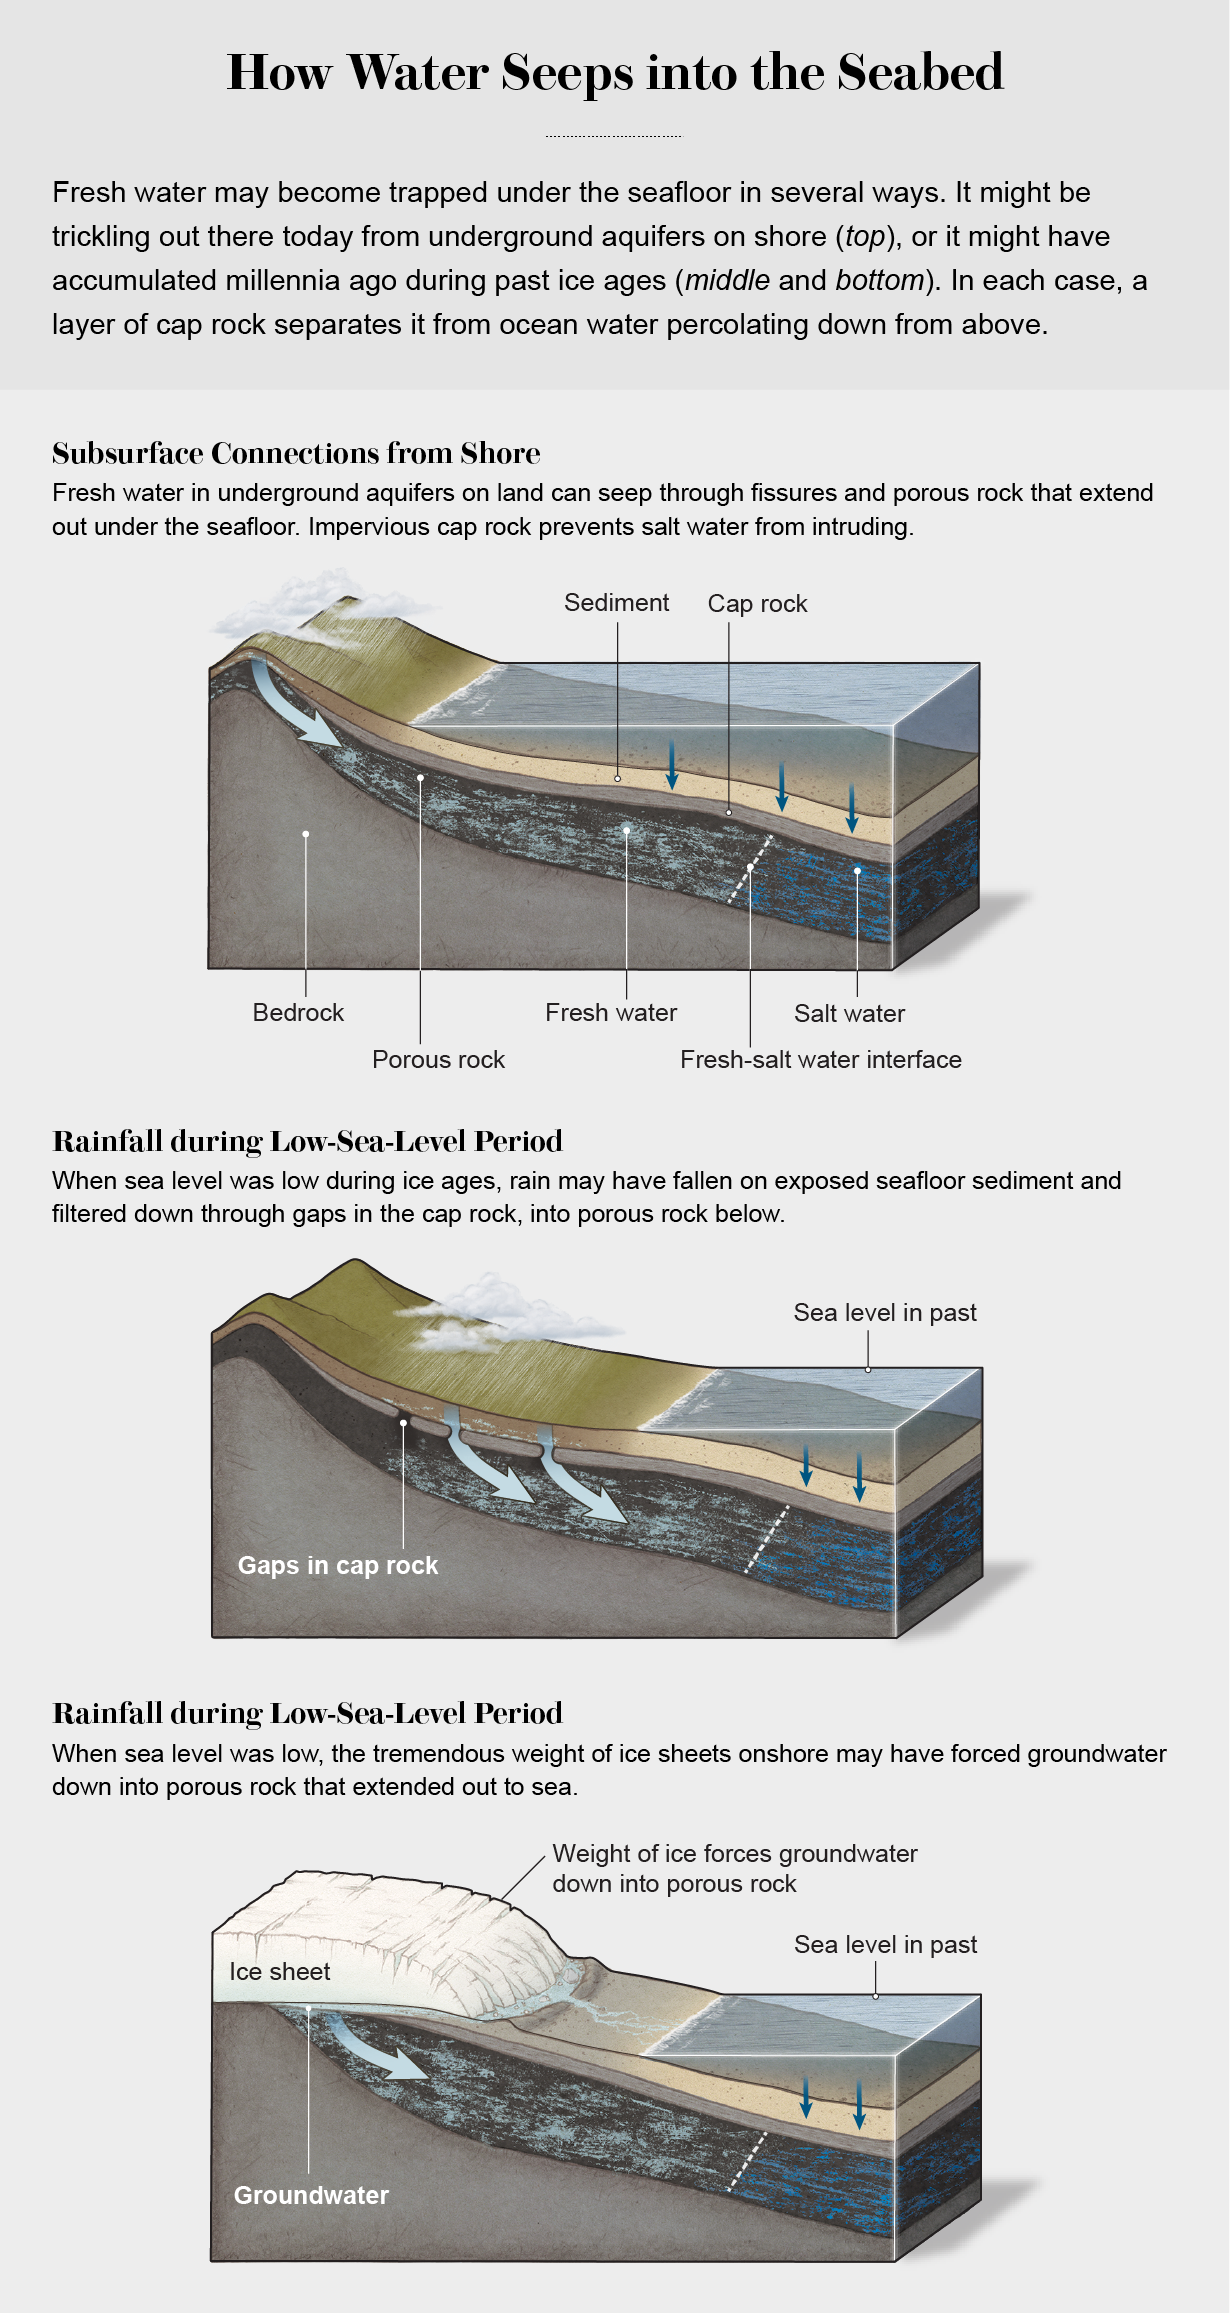 Graphic showing marine cross sections highlights three possibilities for how fresh water seeps into the seabed: subsurface connections from shore, rainfall during low-sea-level period and ice-sheet pressure during low-sea-level period.